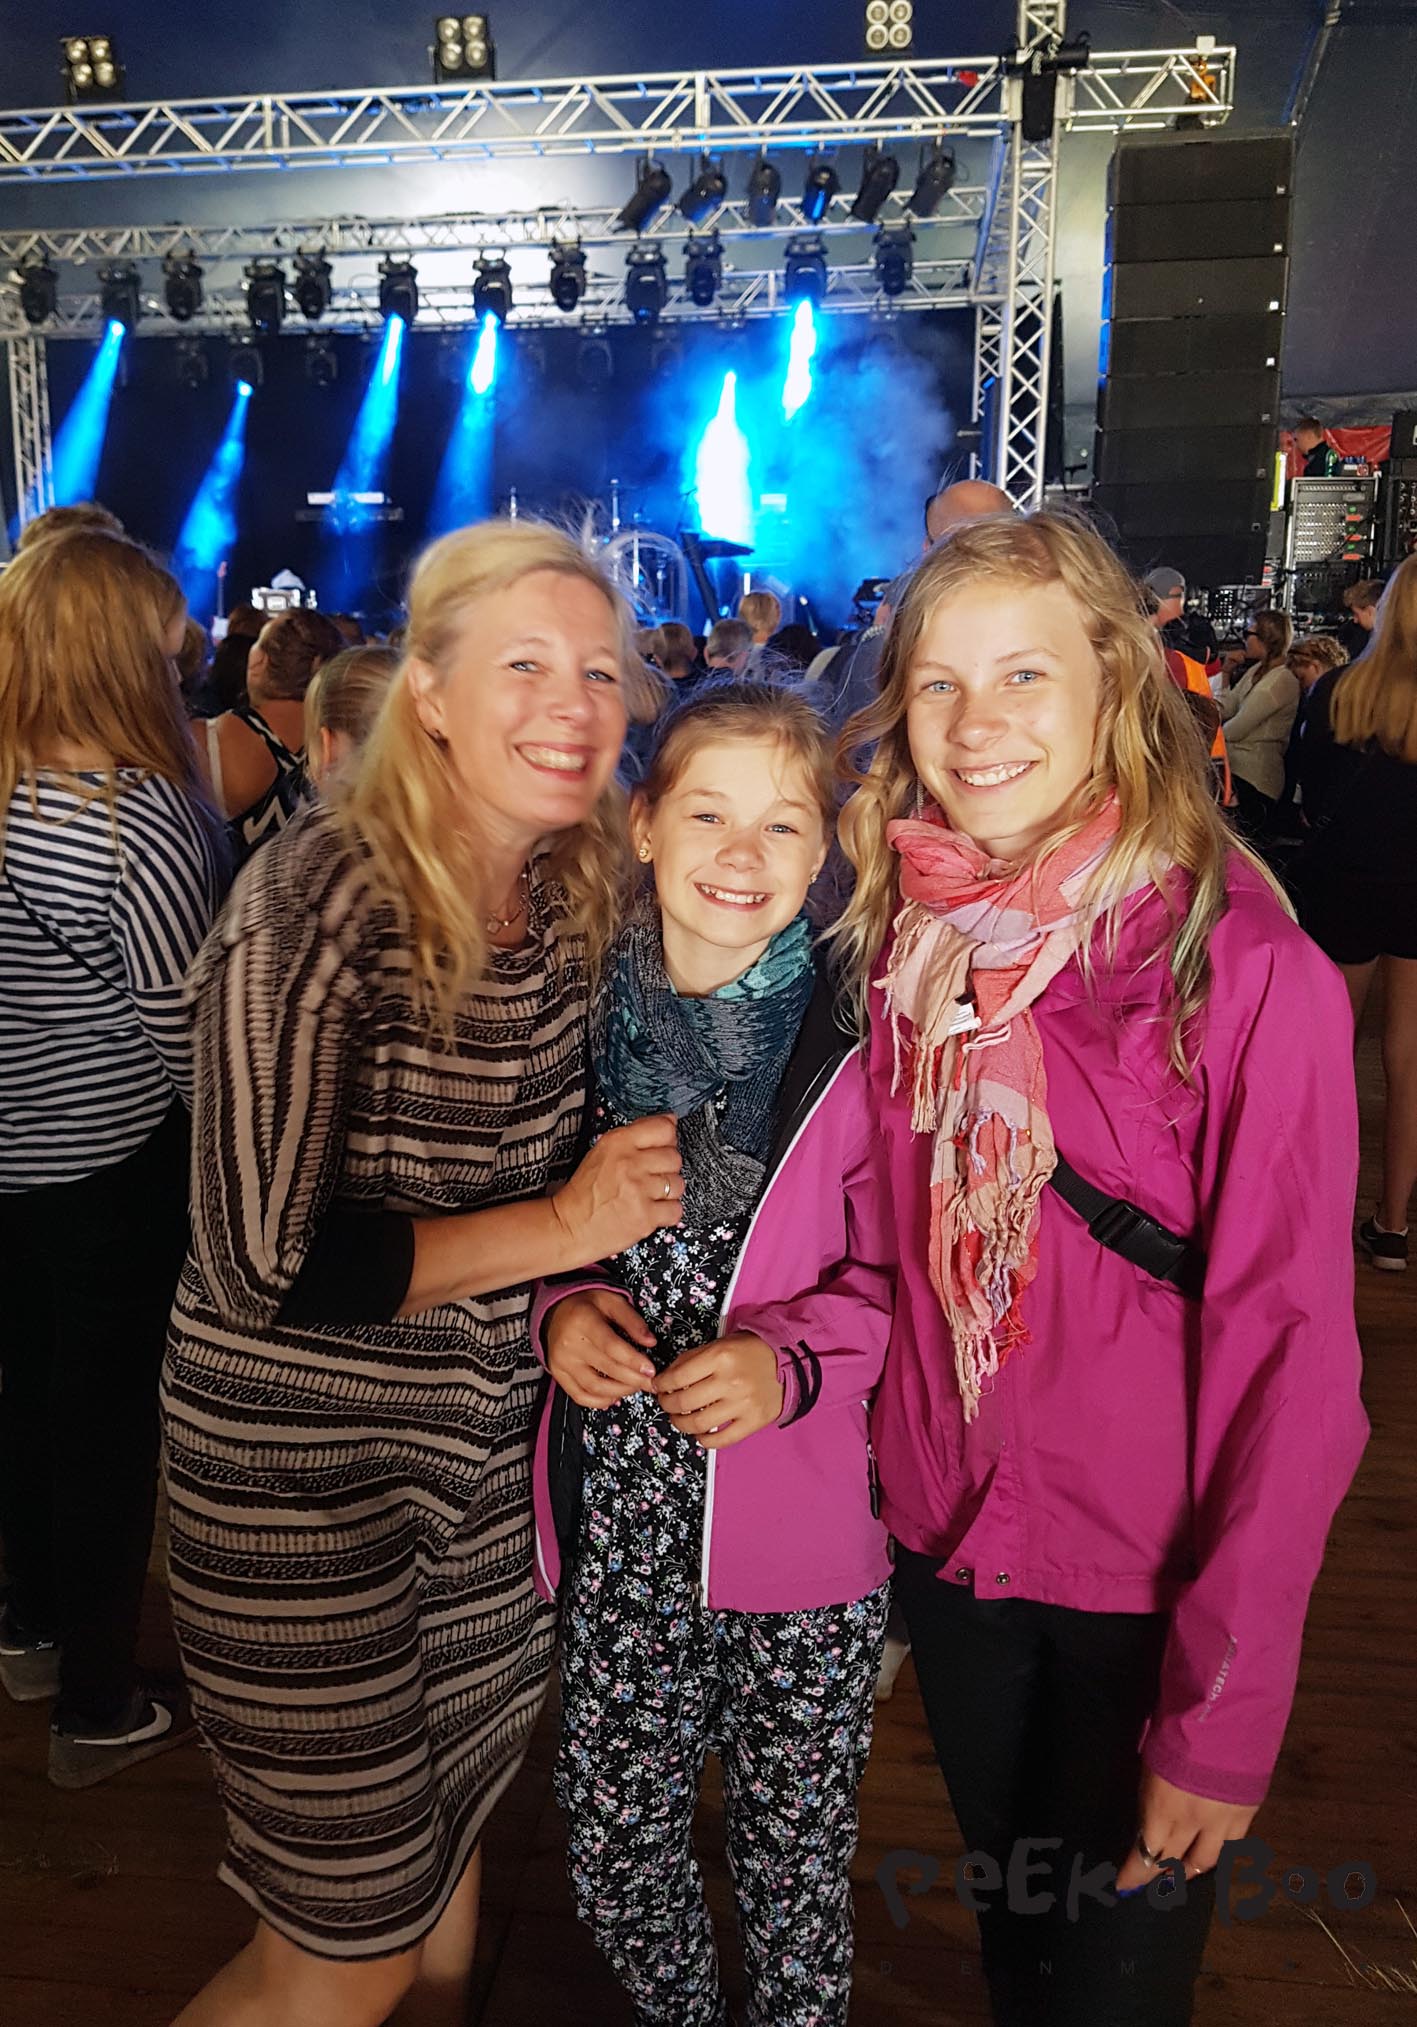 Me and my daughters at Vig festival 2016.